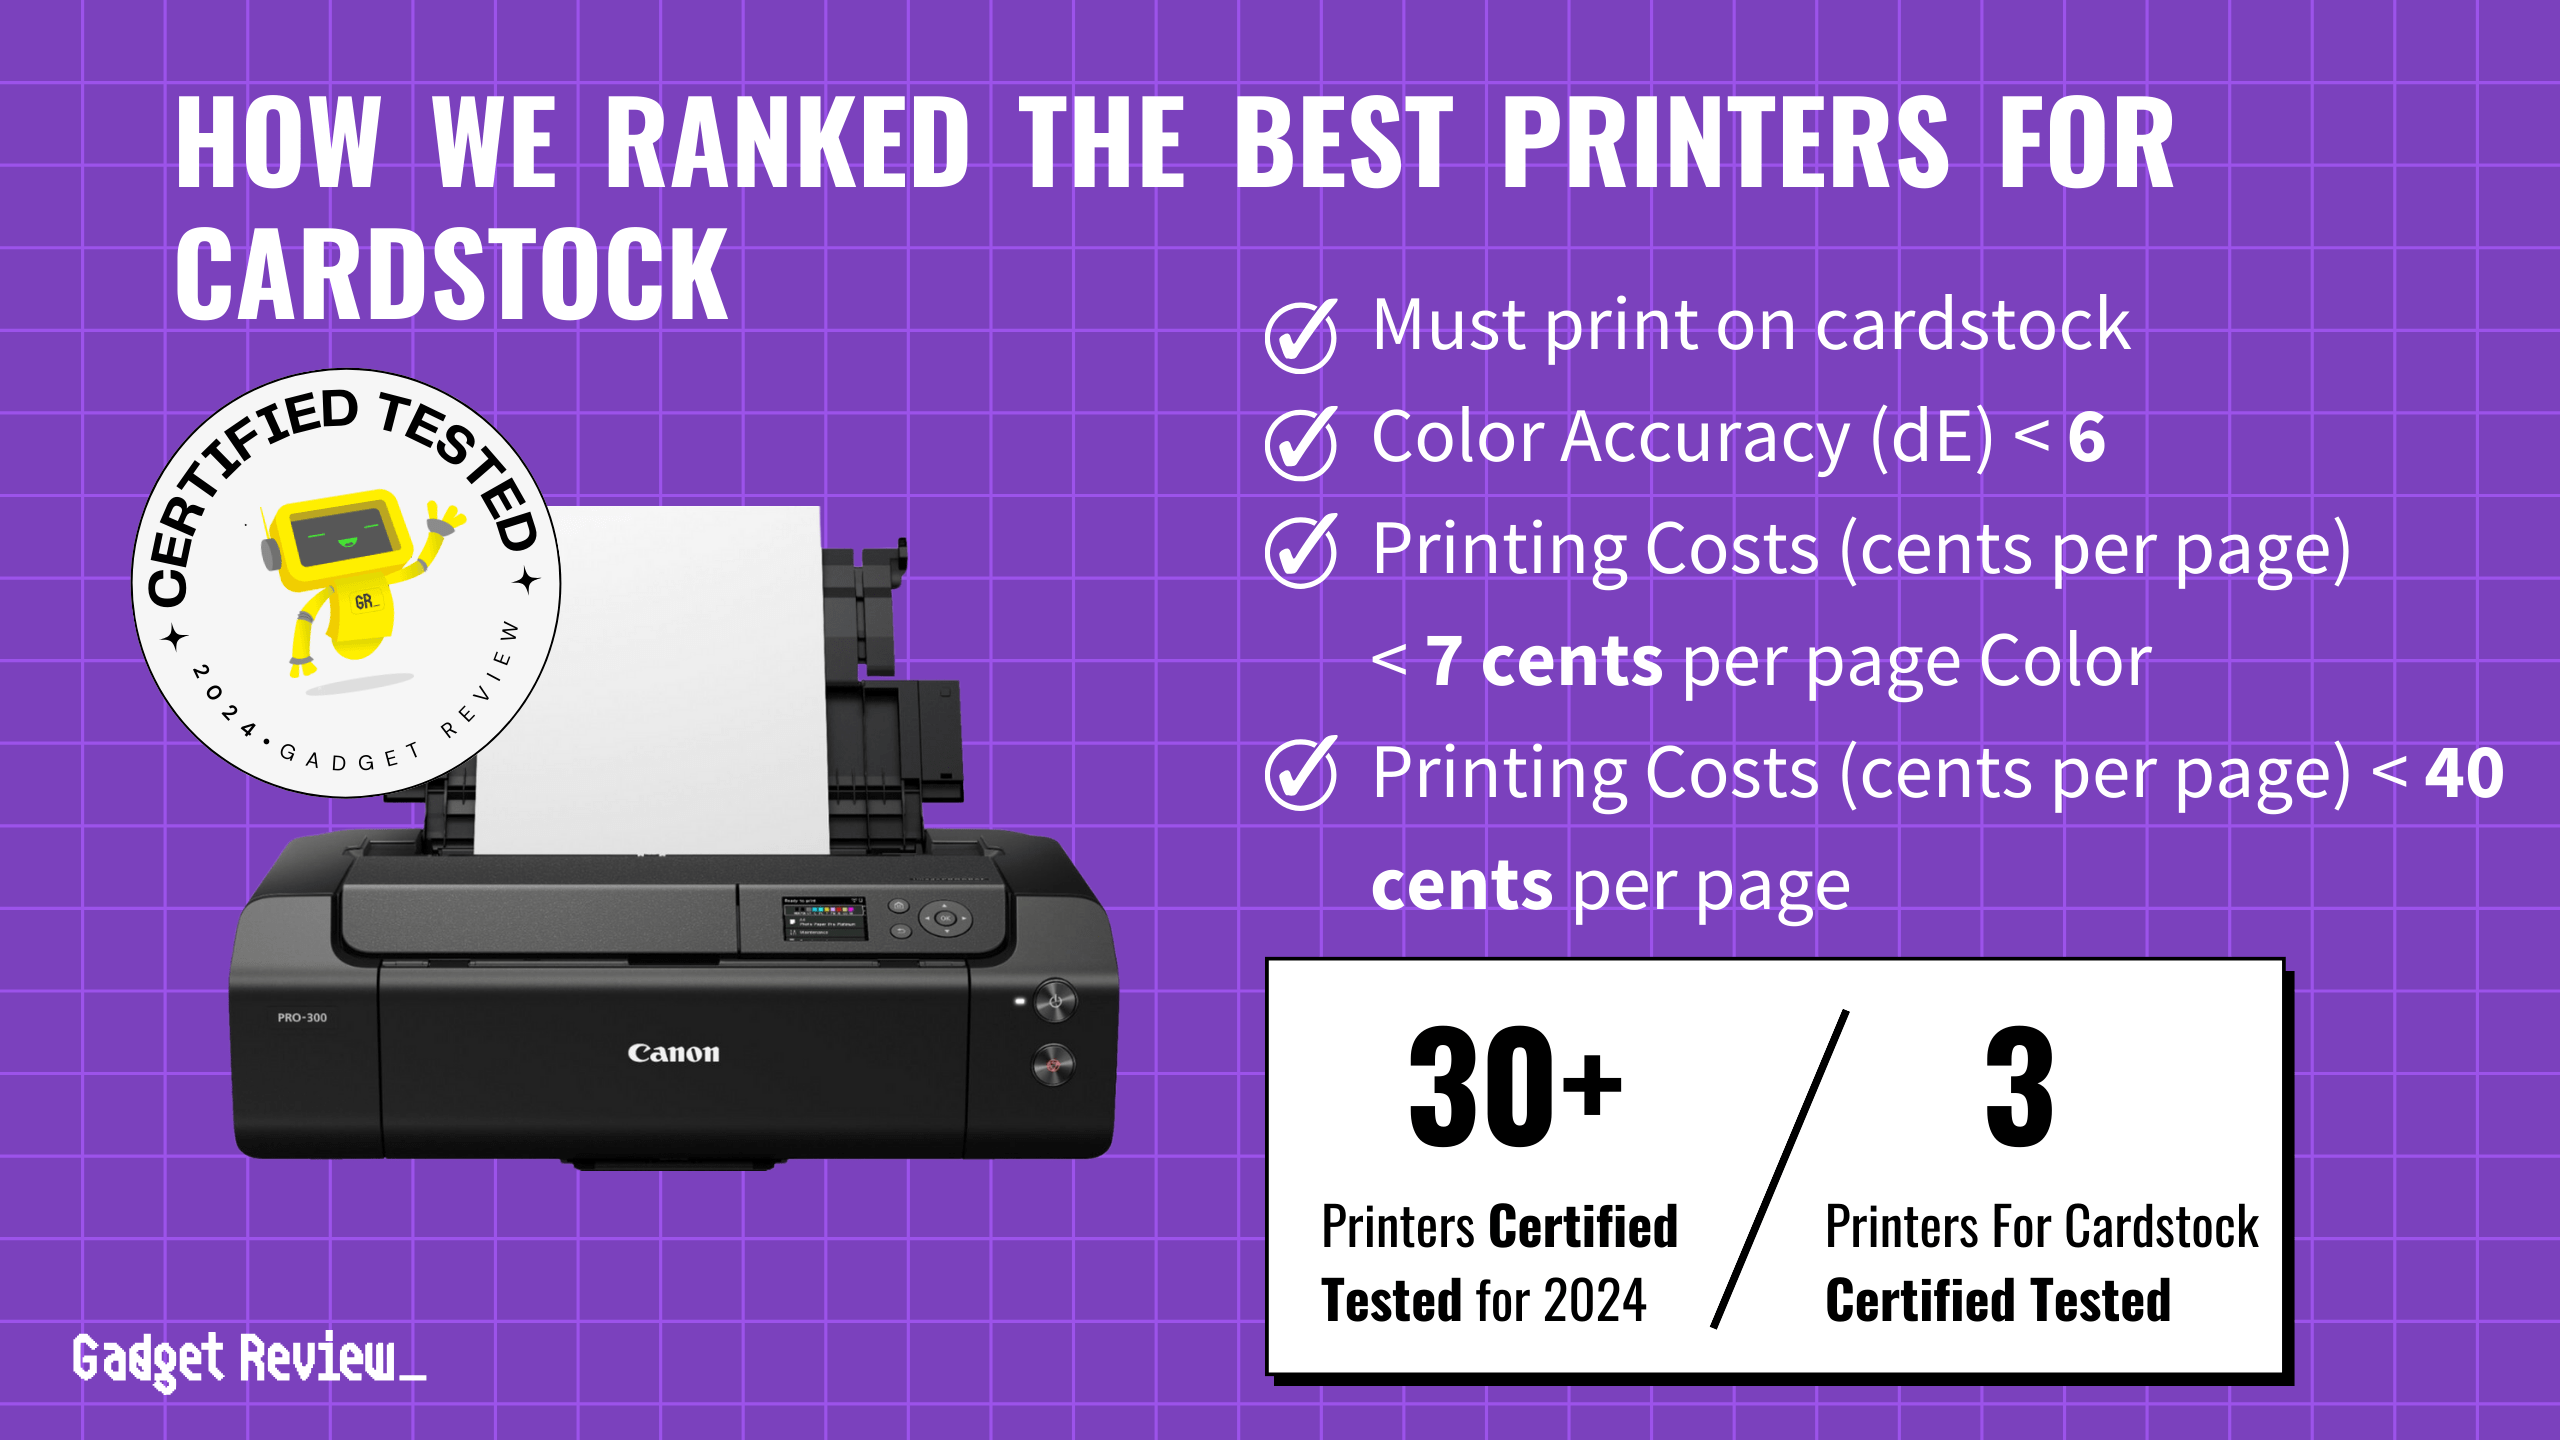 The 3 Best Printers for Cardstock in 2024